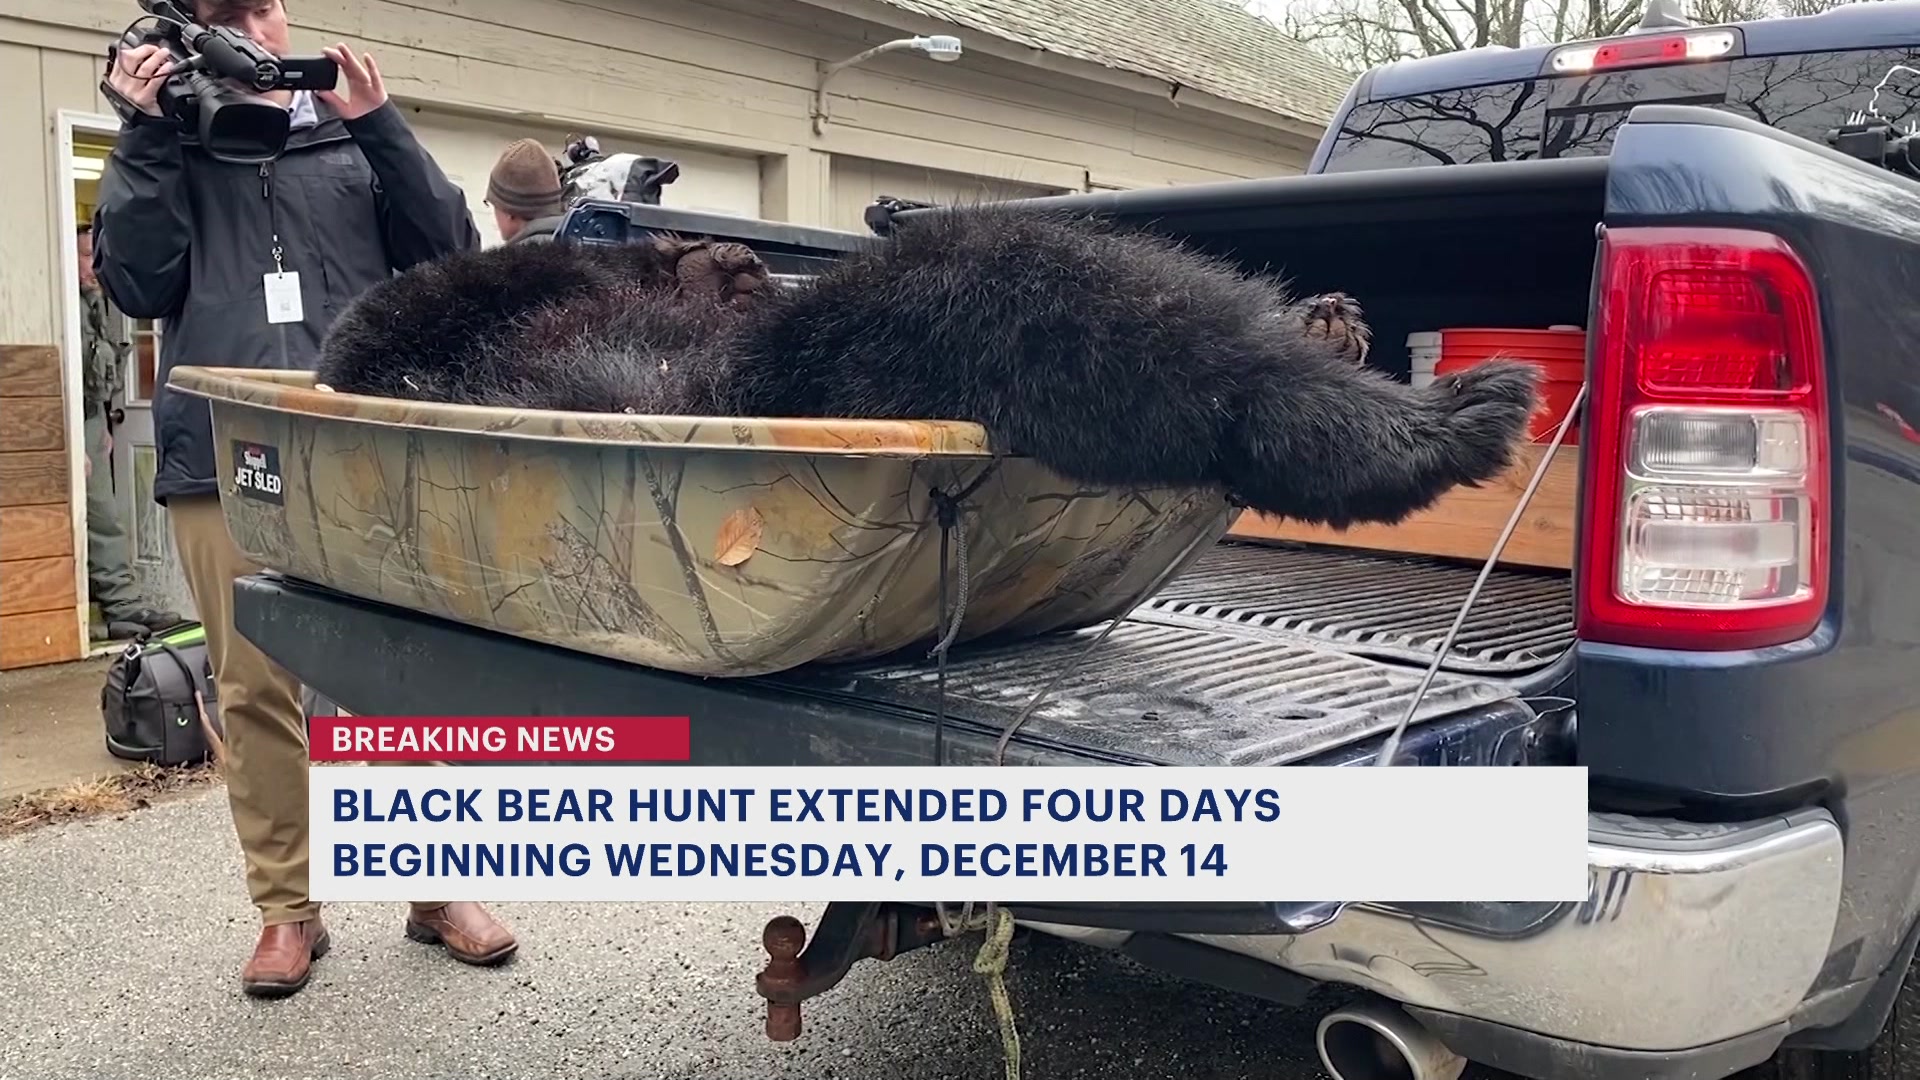 New Jersey’s bear hunting season will be extended 4 days